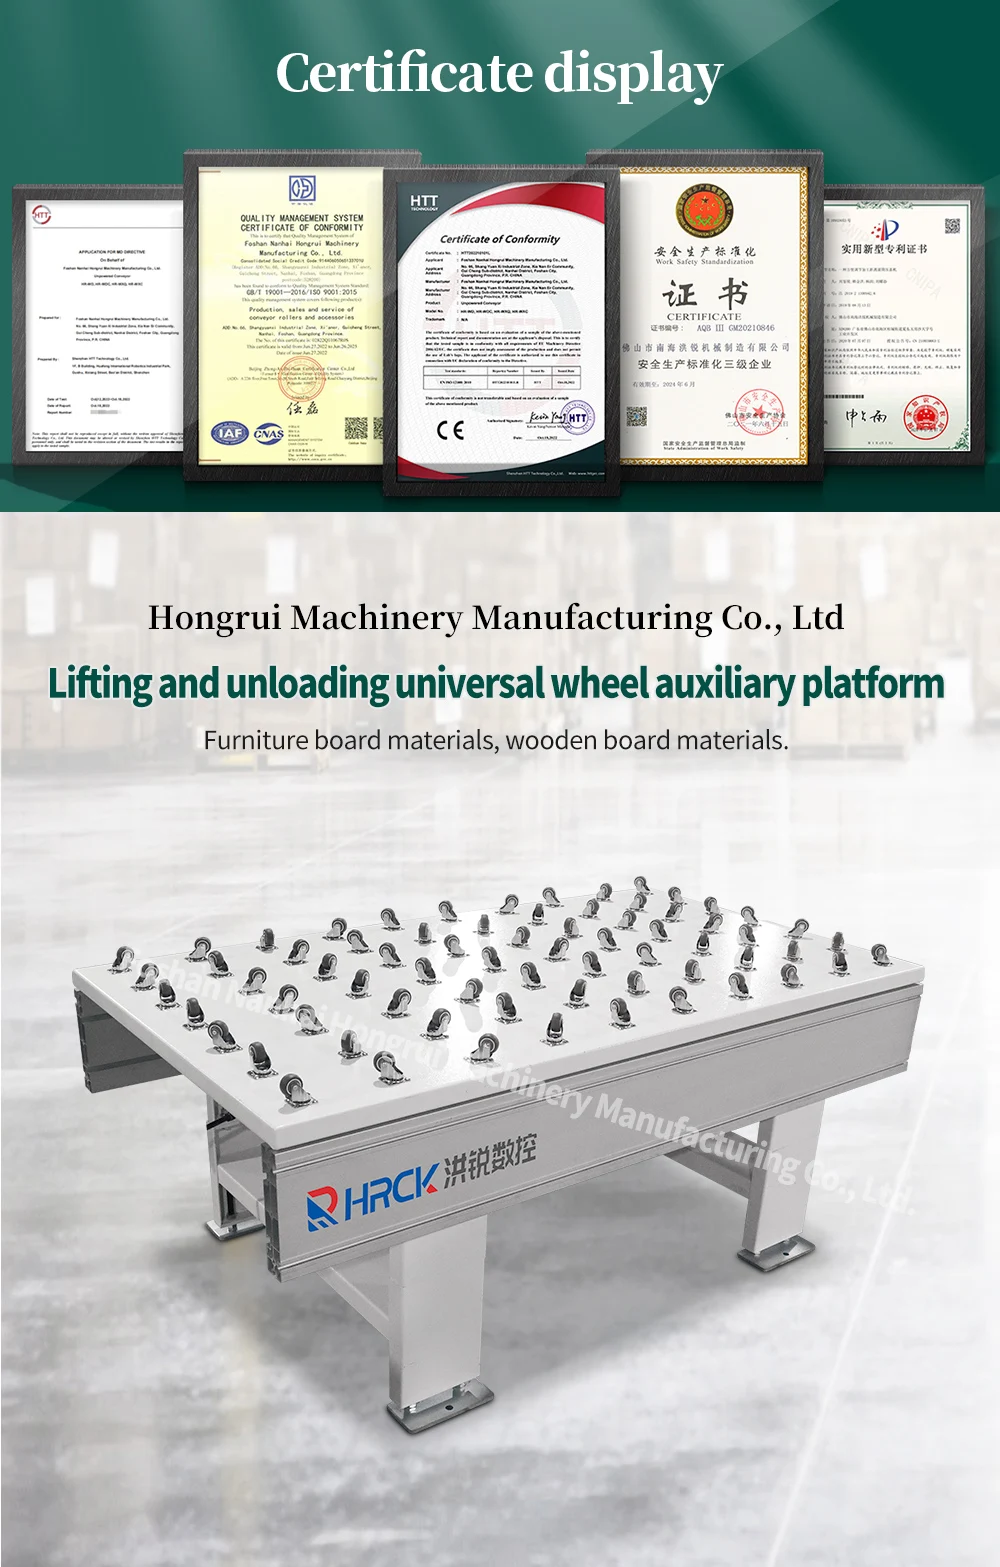 Hongrui is a customized roller table for sheet metal transportation, lifting and universal ball platform details